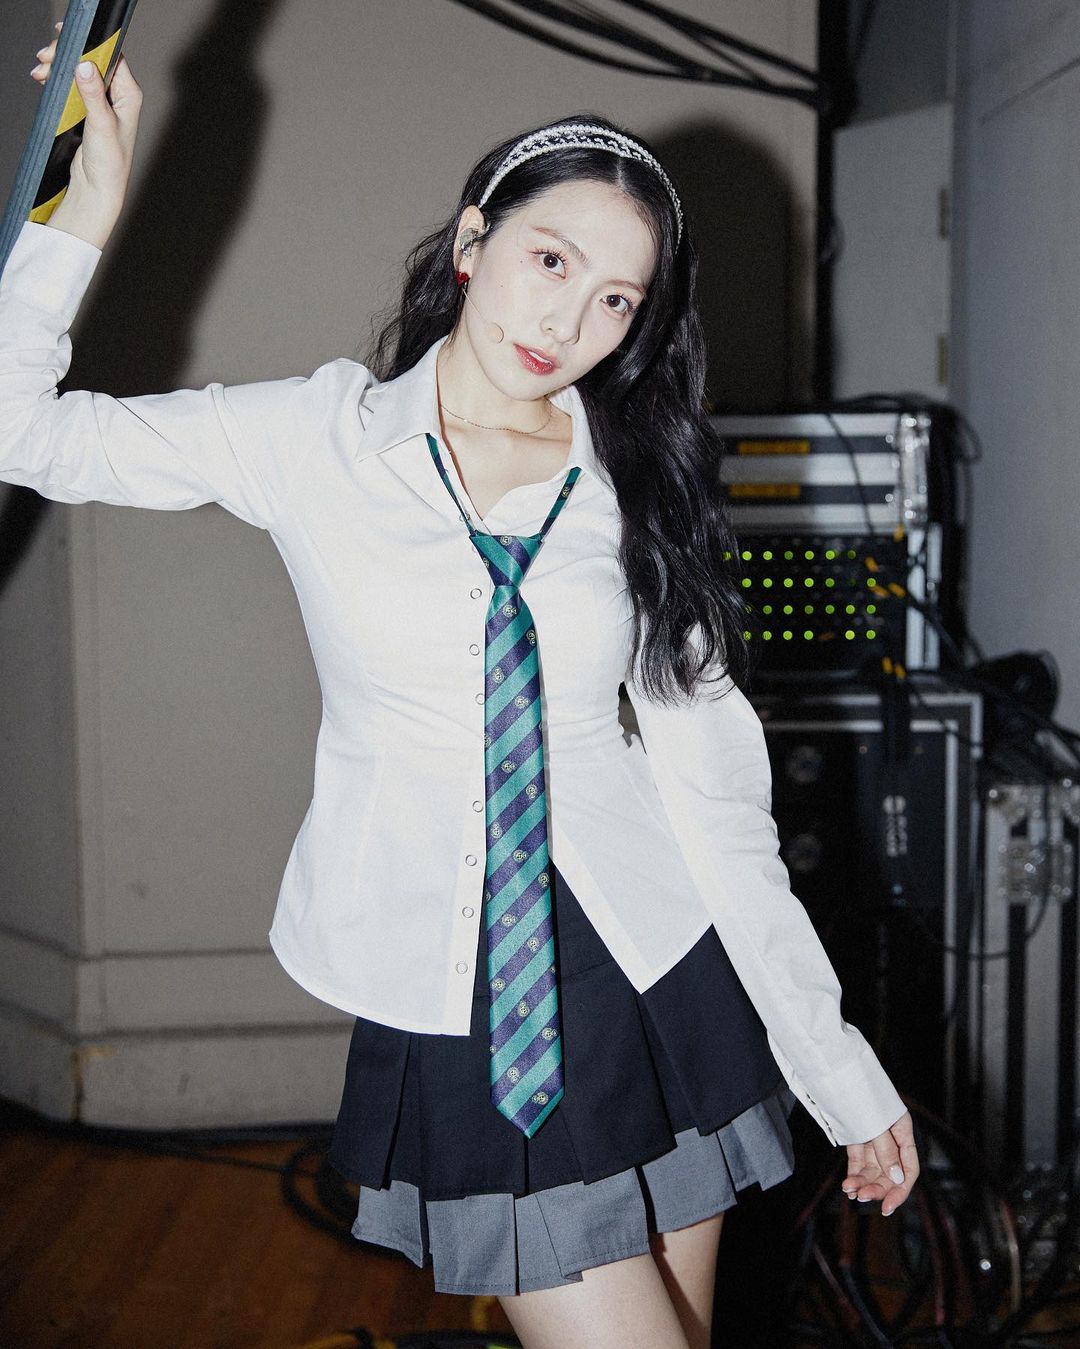 Becoming "small class president" with the same school fashion trend as k-pop idols